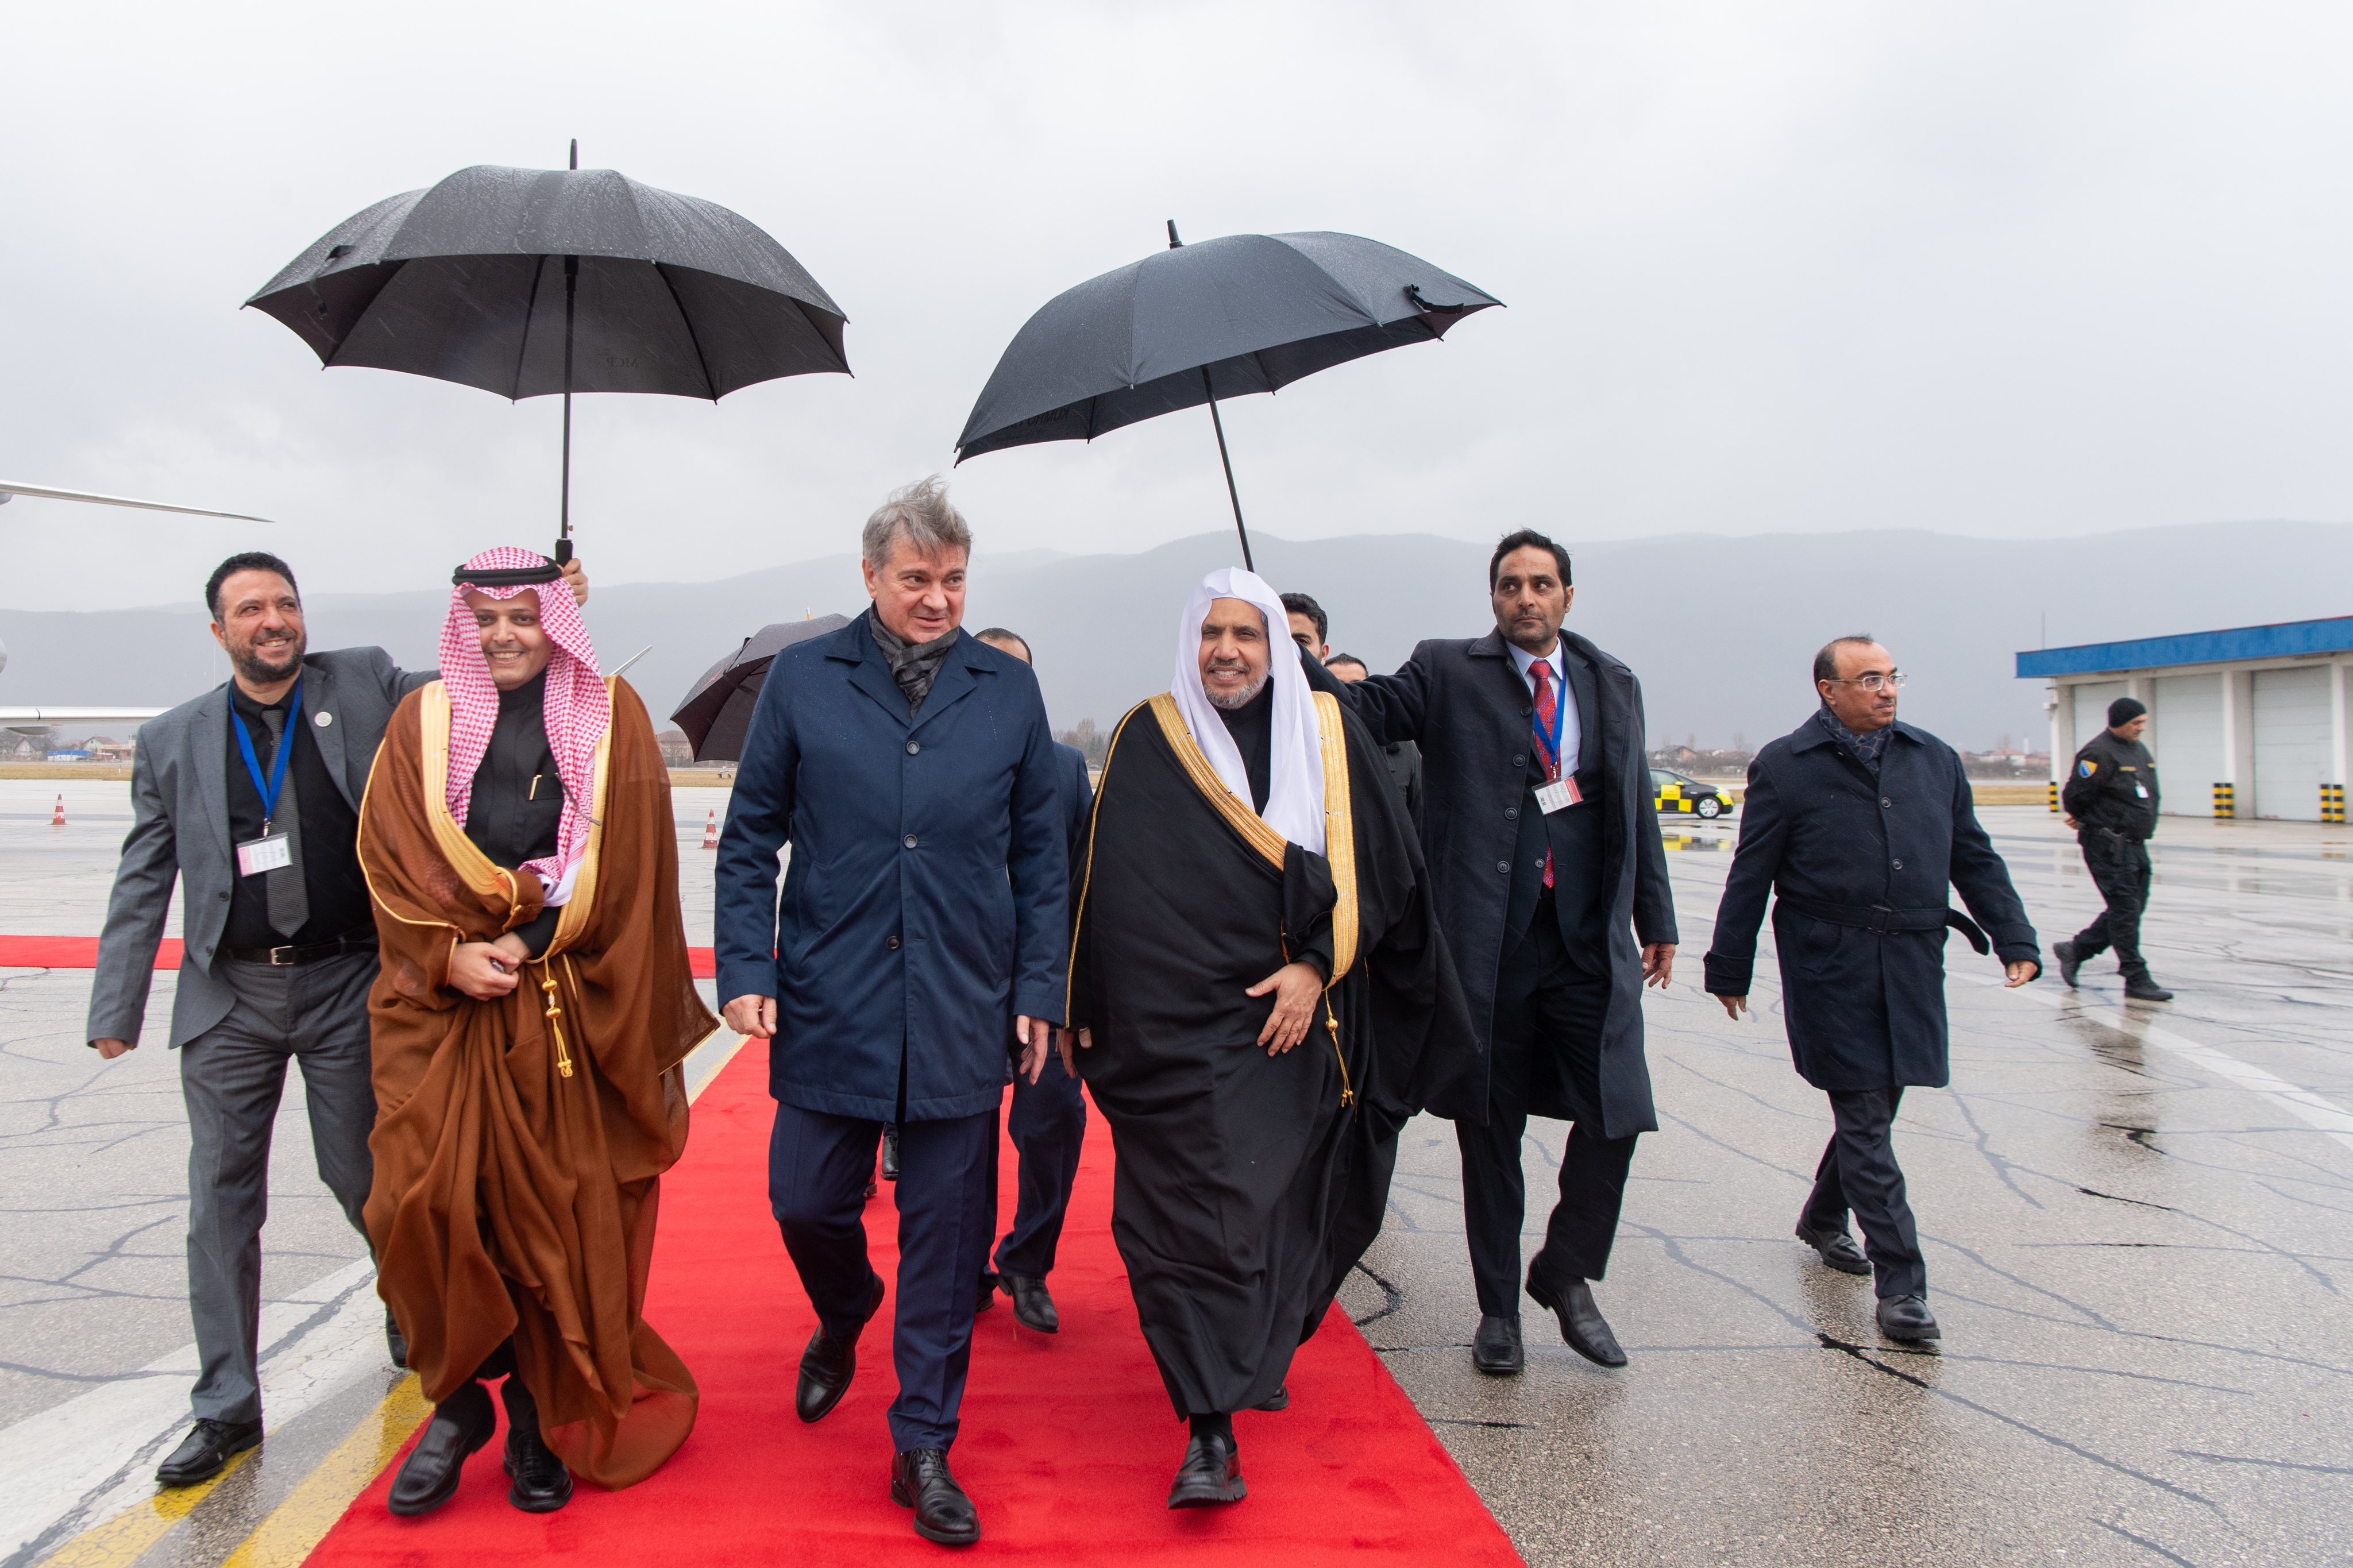 His Excellency Sheikh Dr. Mohammed Al-Issa, Secretary-General of the MWL and Chairman of the Organization of Muslim Scholars, arrived in the Bosnian capital of Sarajevo